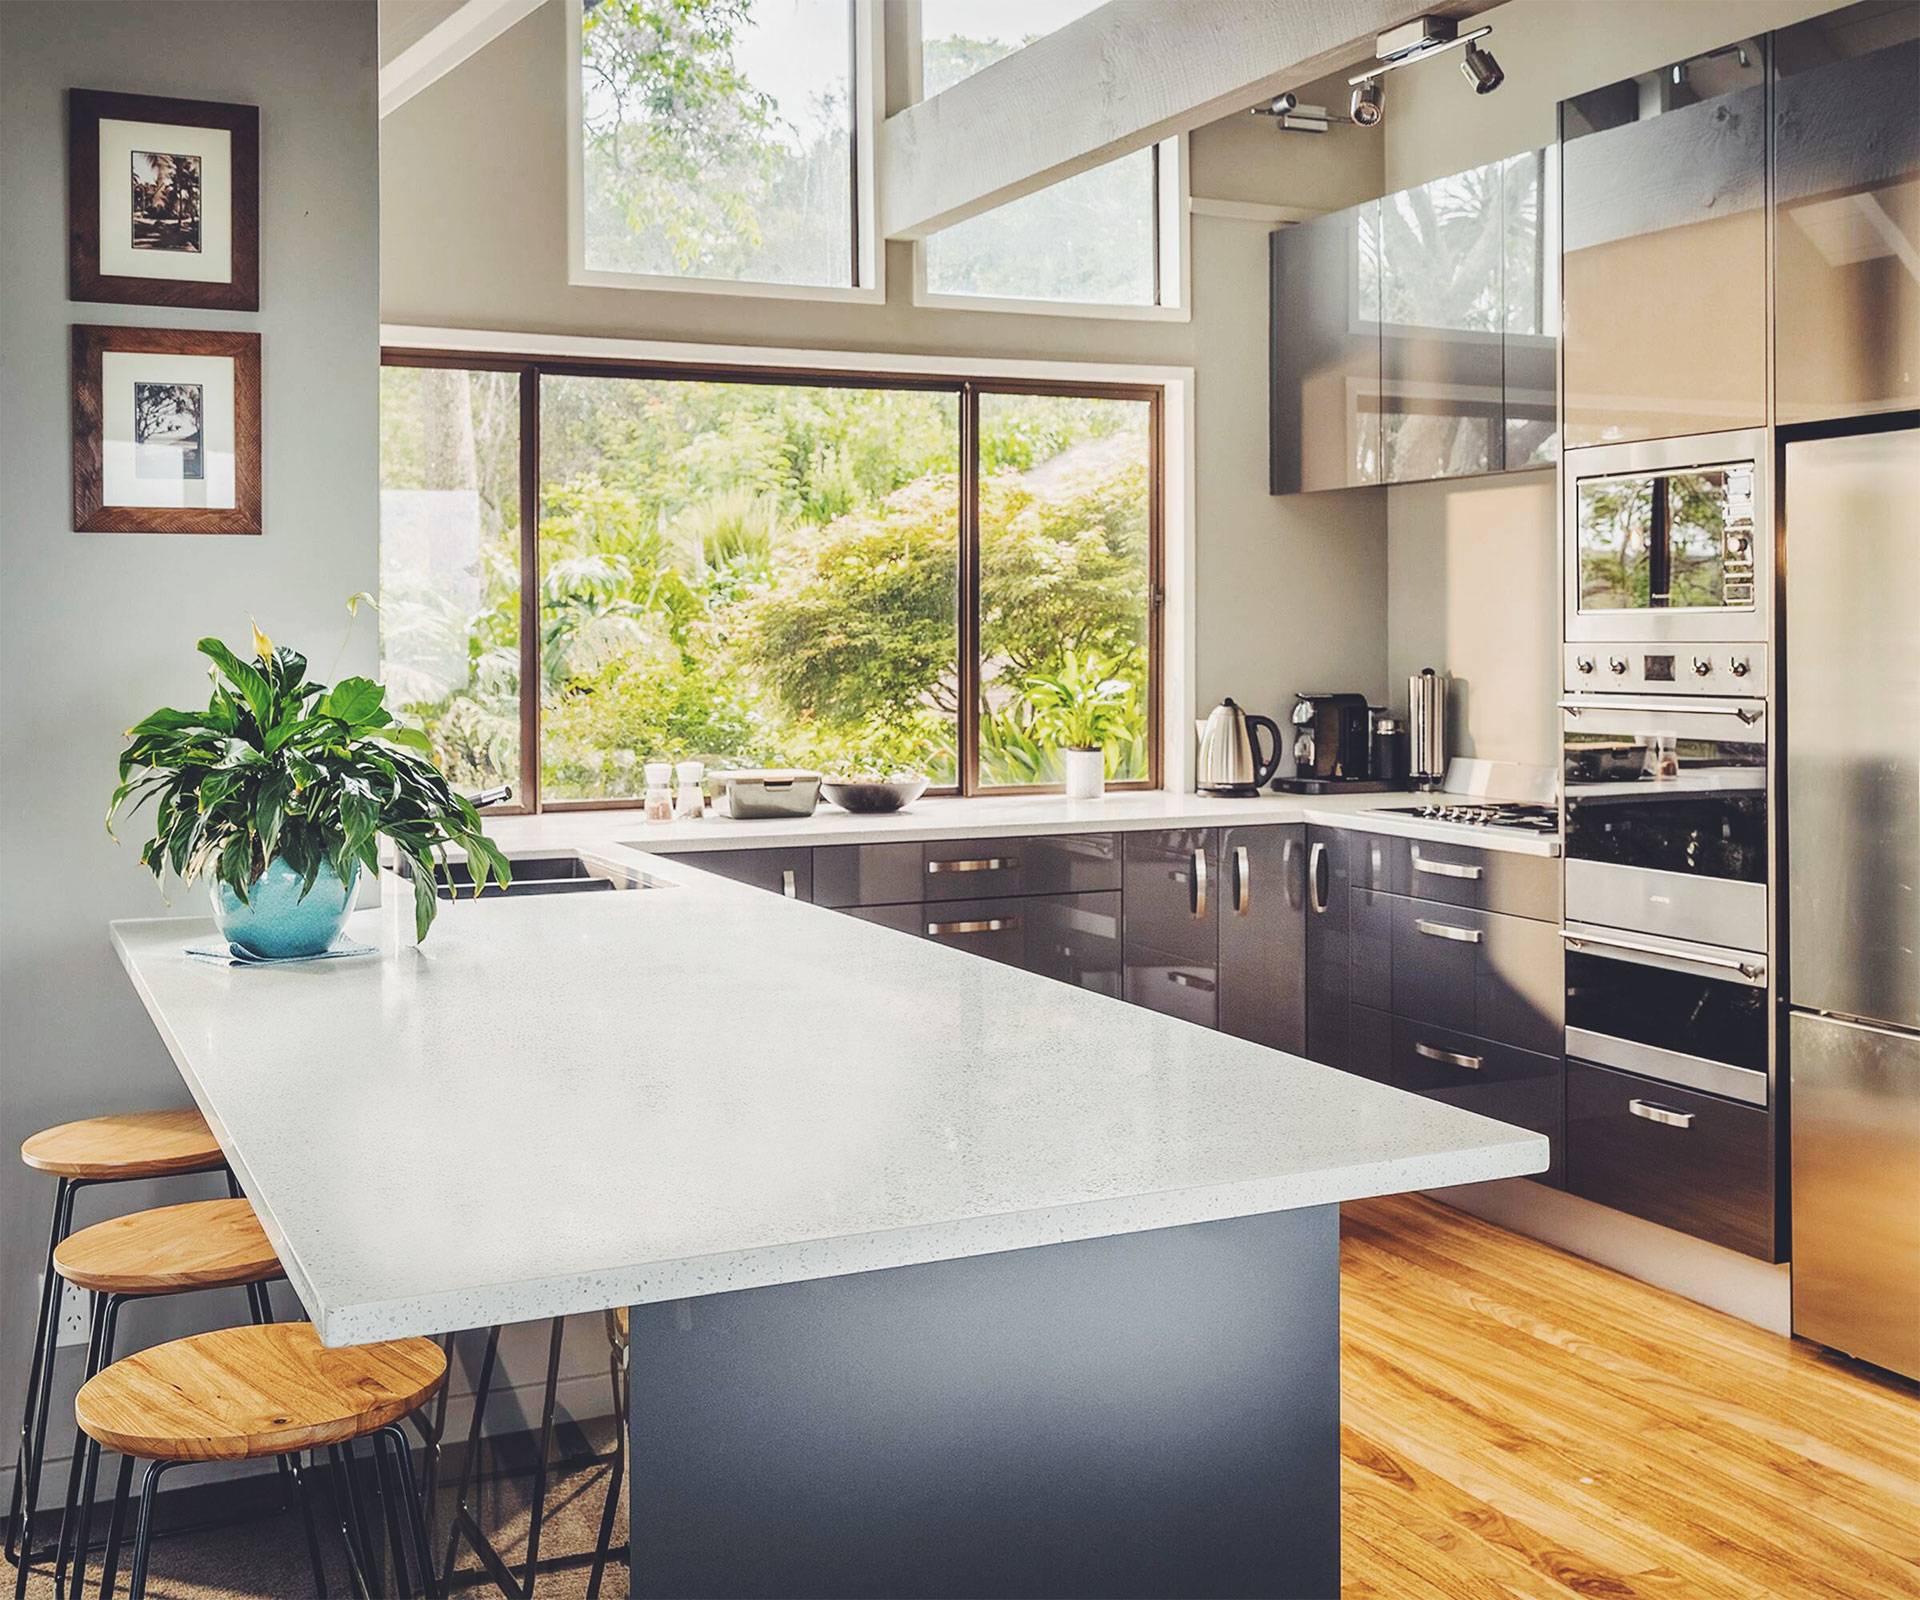 6 things you need to do before you plan and design a new kitchen